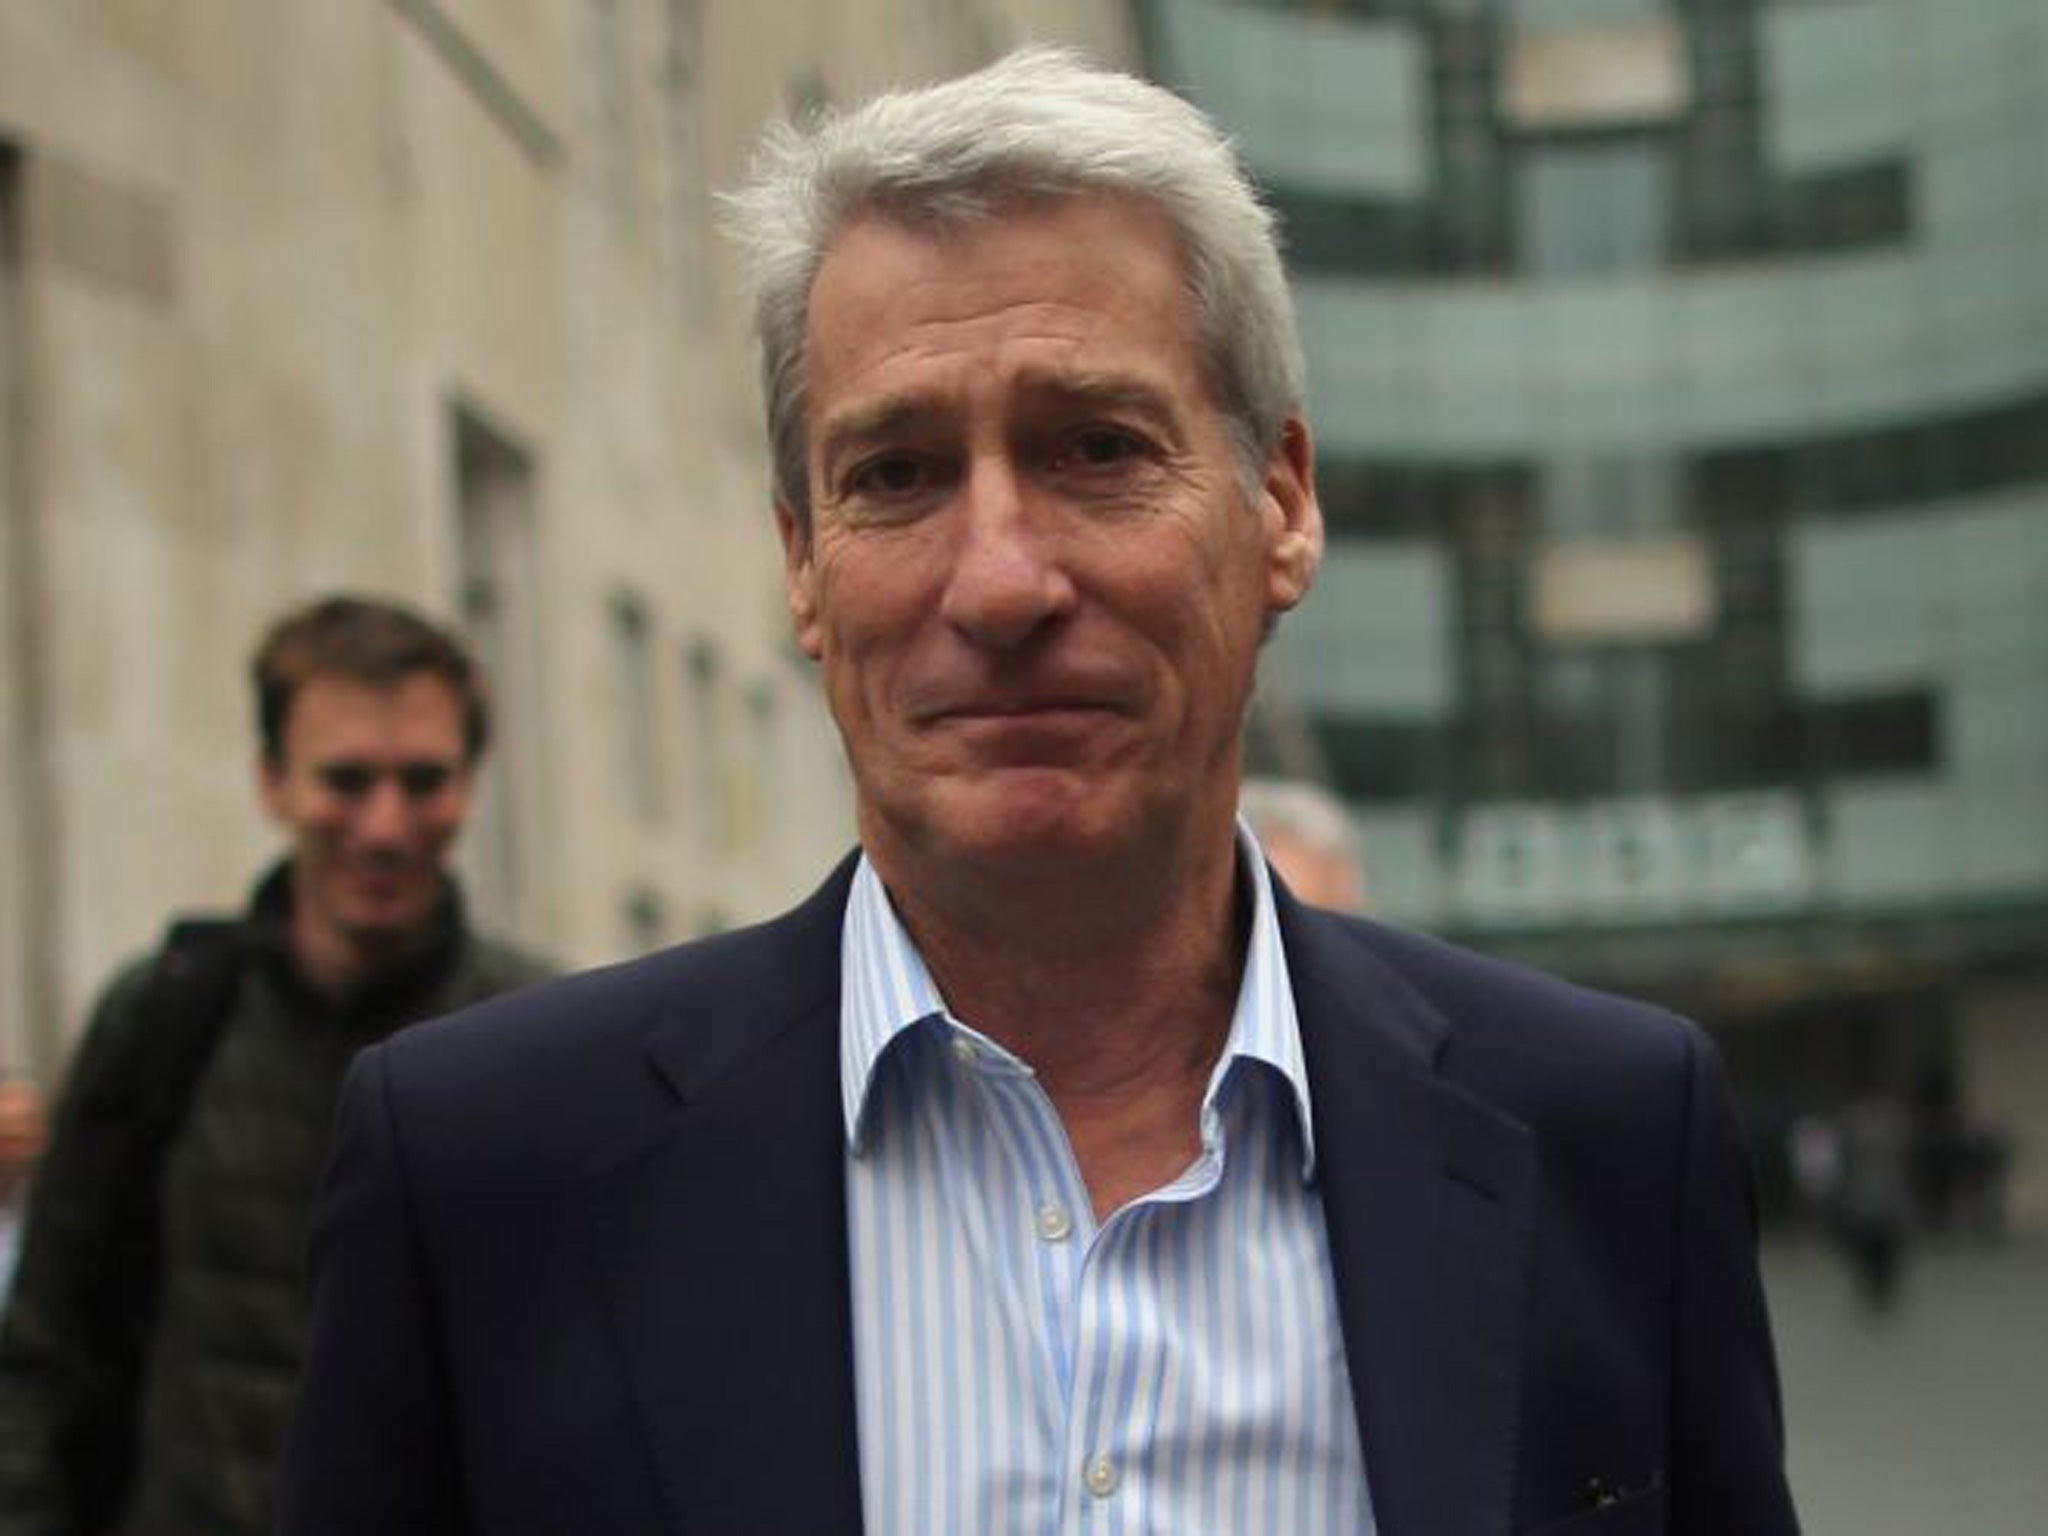 Jeremy Paxman has launched a blistering attack on modern poetry